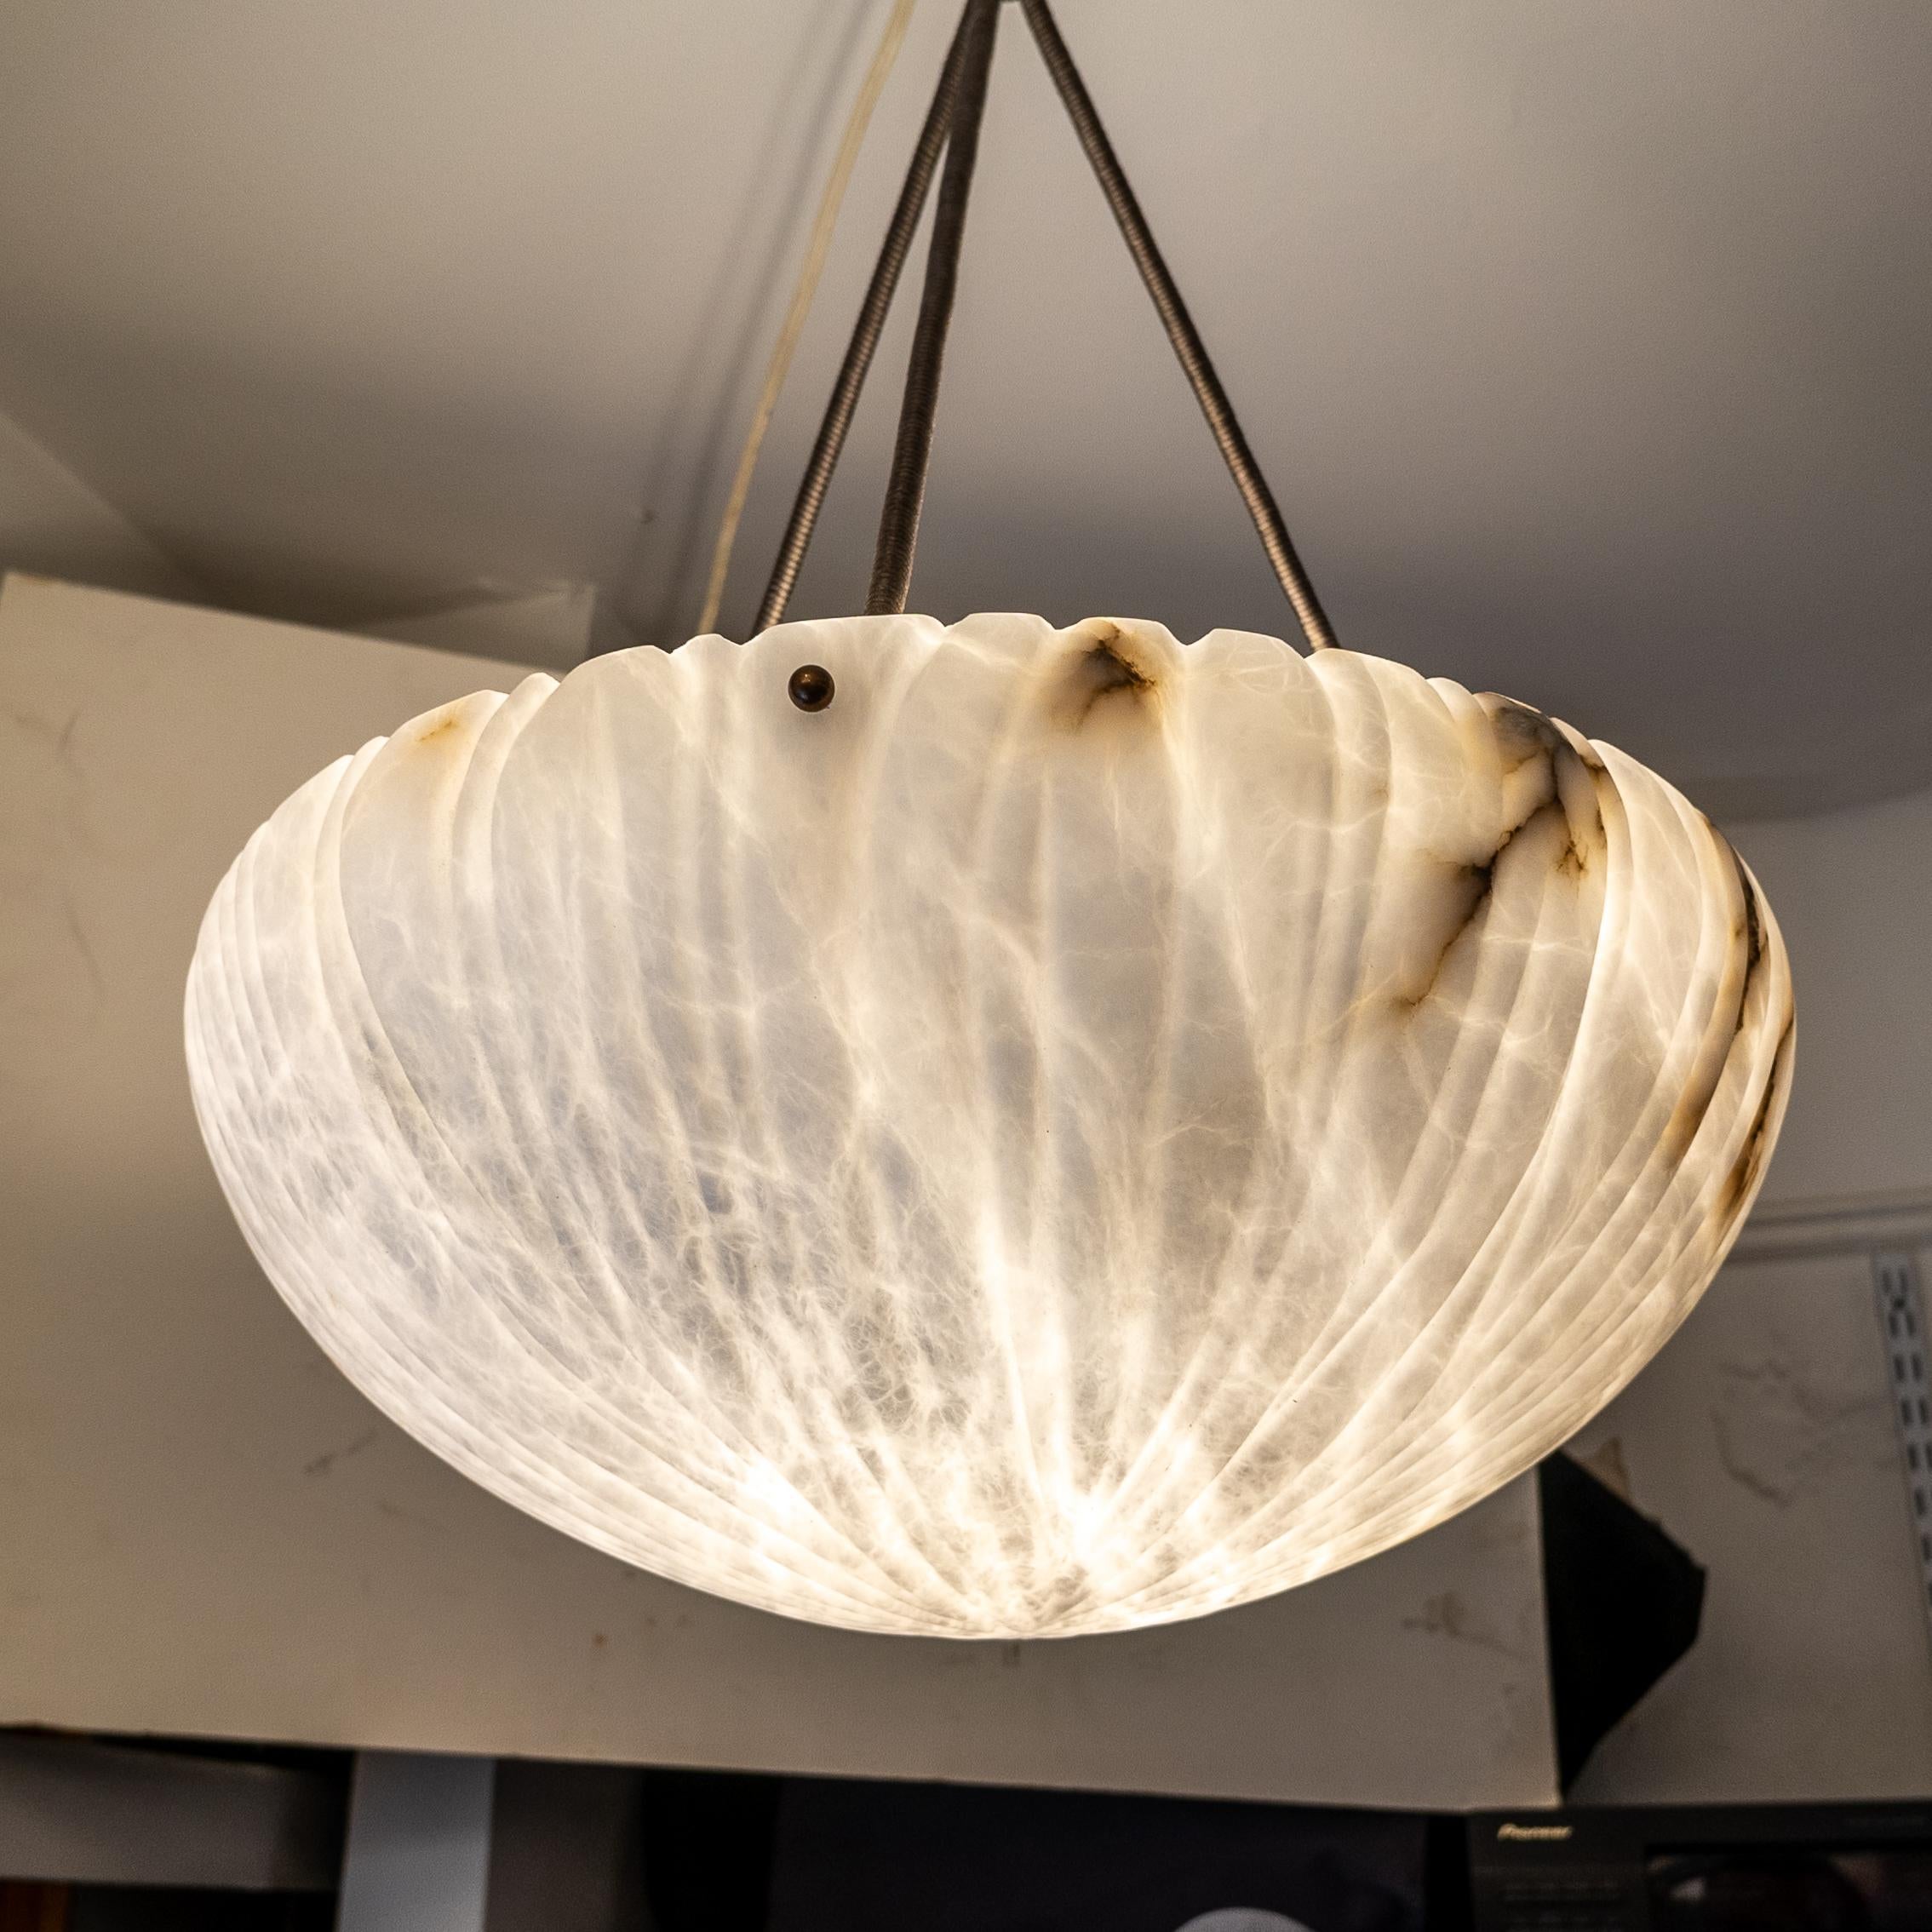 Reflecting the revival of organic motifs during the late Art Deco era, this ceiling fixture embodies a return to nature's embrace. Encased within a gracefully carved reedbed, the iconic bowl-shaped alabaster shade exudes timeless sophistication.